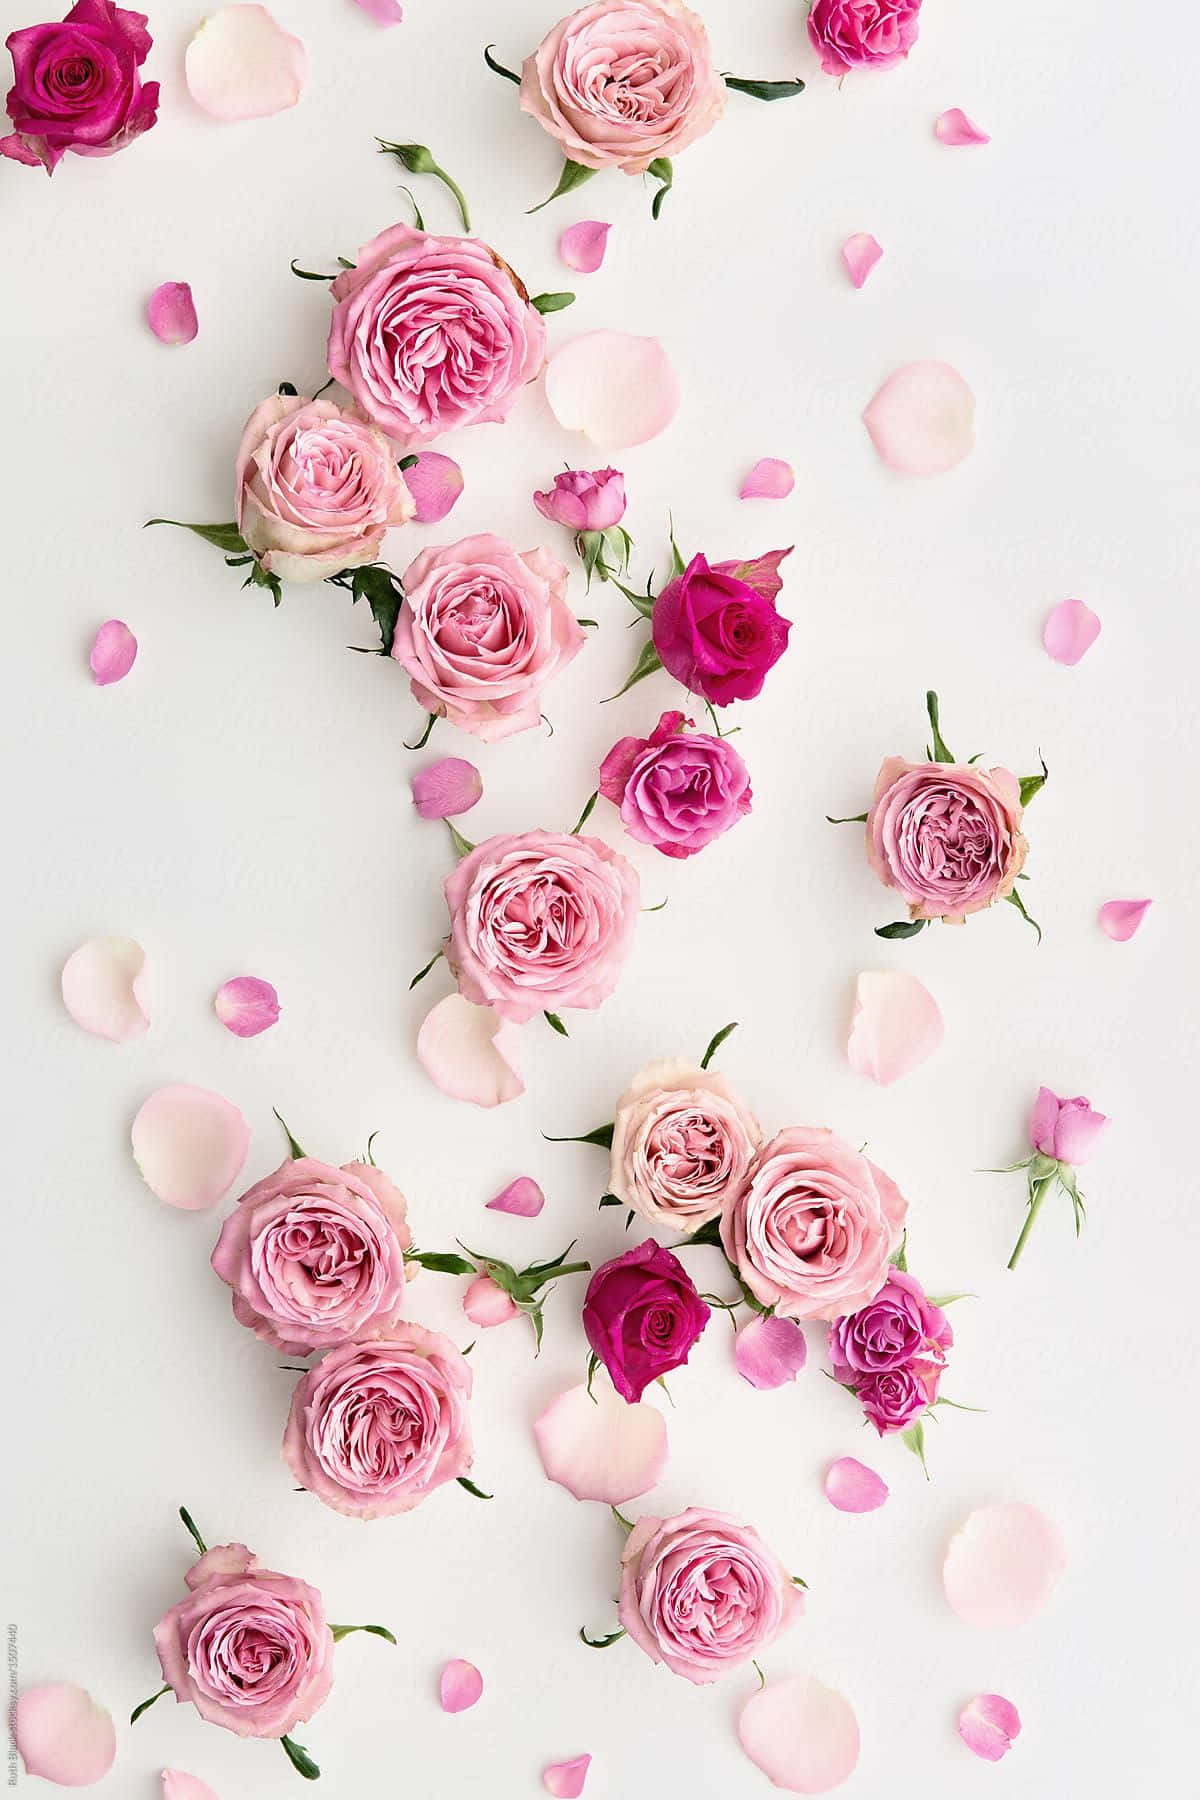 Pink Roses On White Background By Samantha Mccarthy For Stocksy United Wallpaper